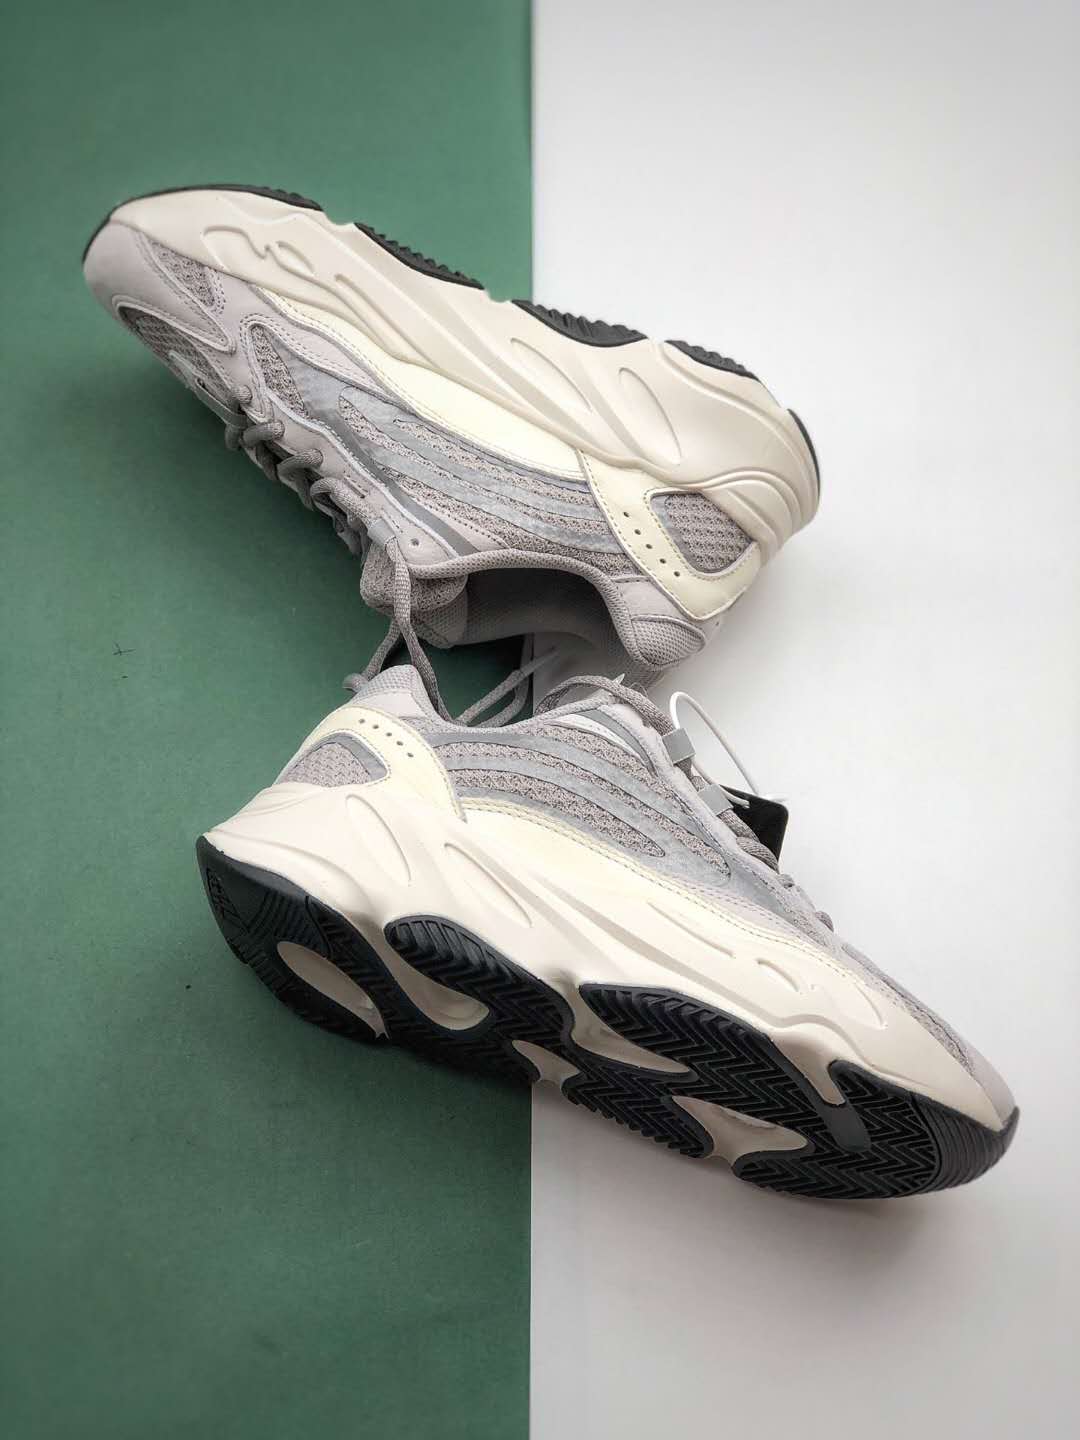 Adidas Yeezy Boost 700 V2 Static - Premium Sneaker - Limited Edition